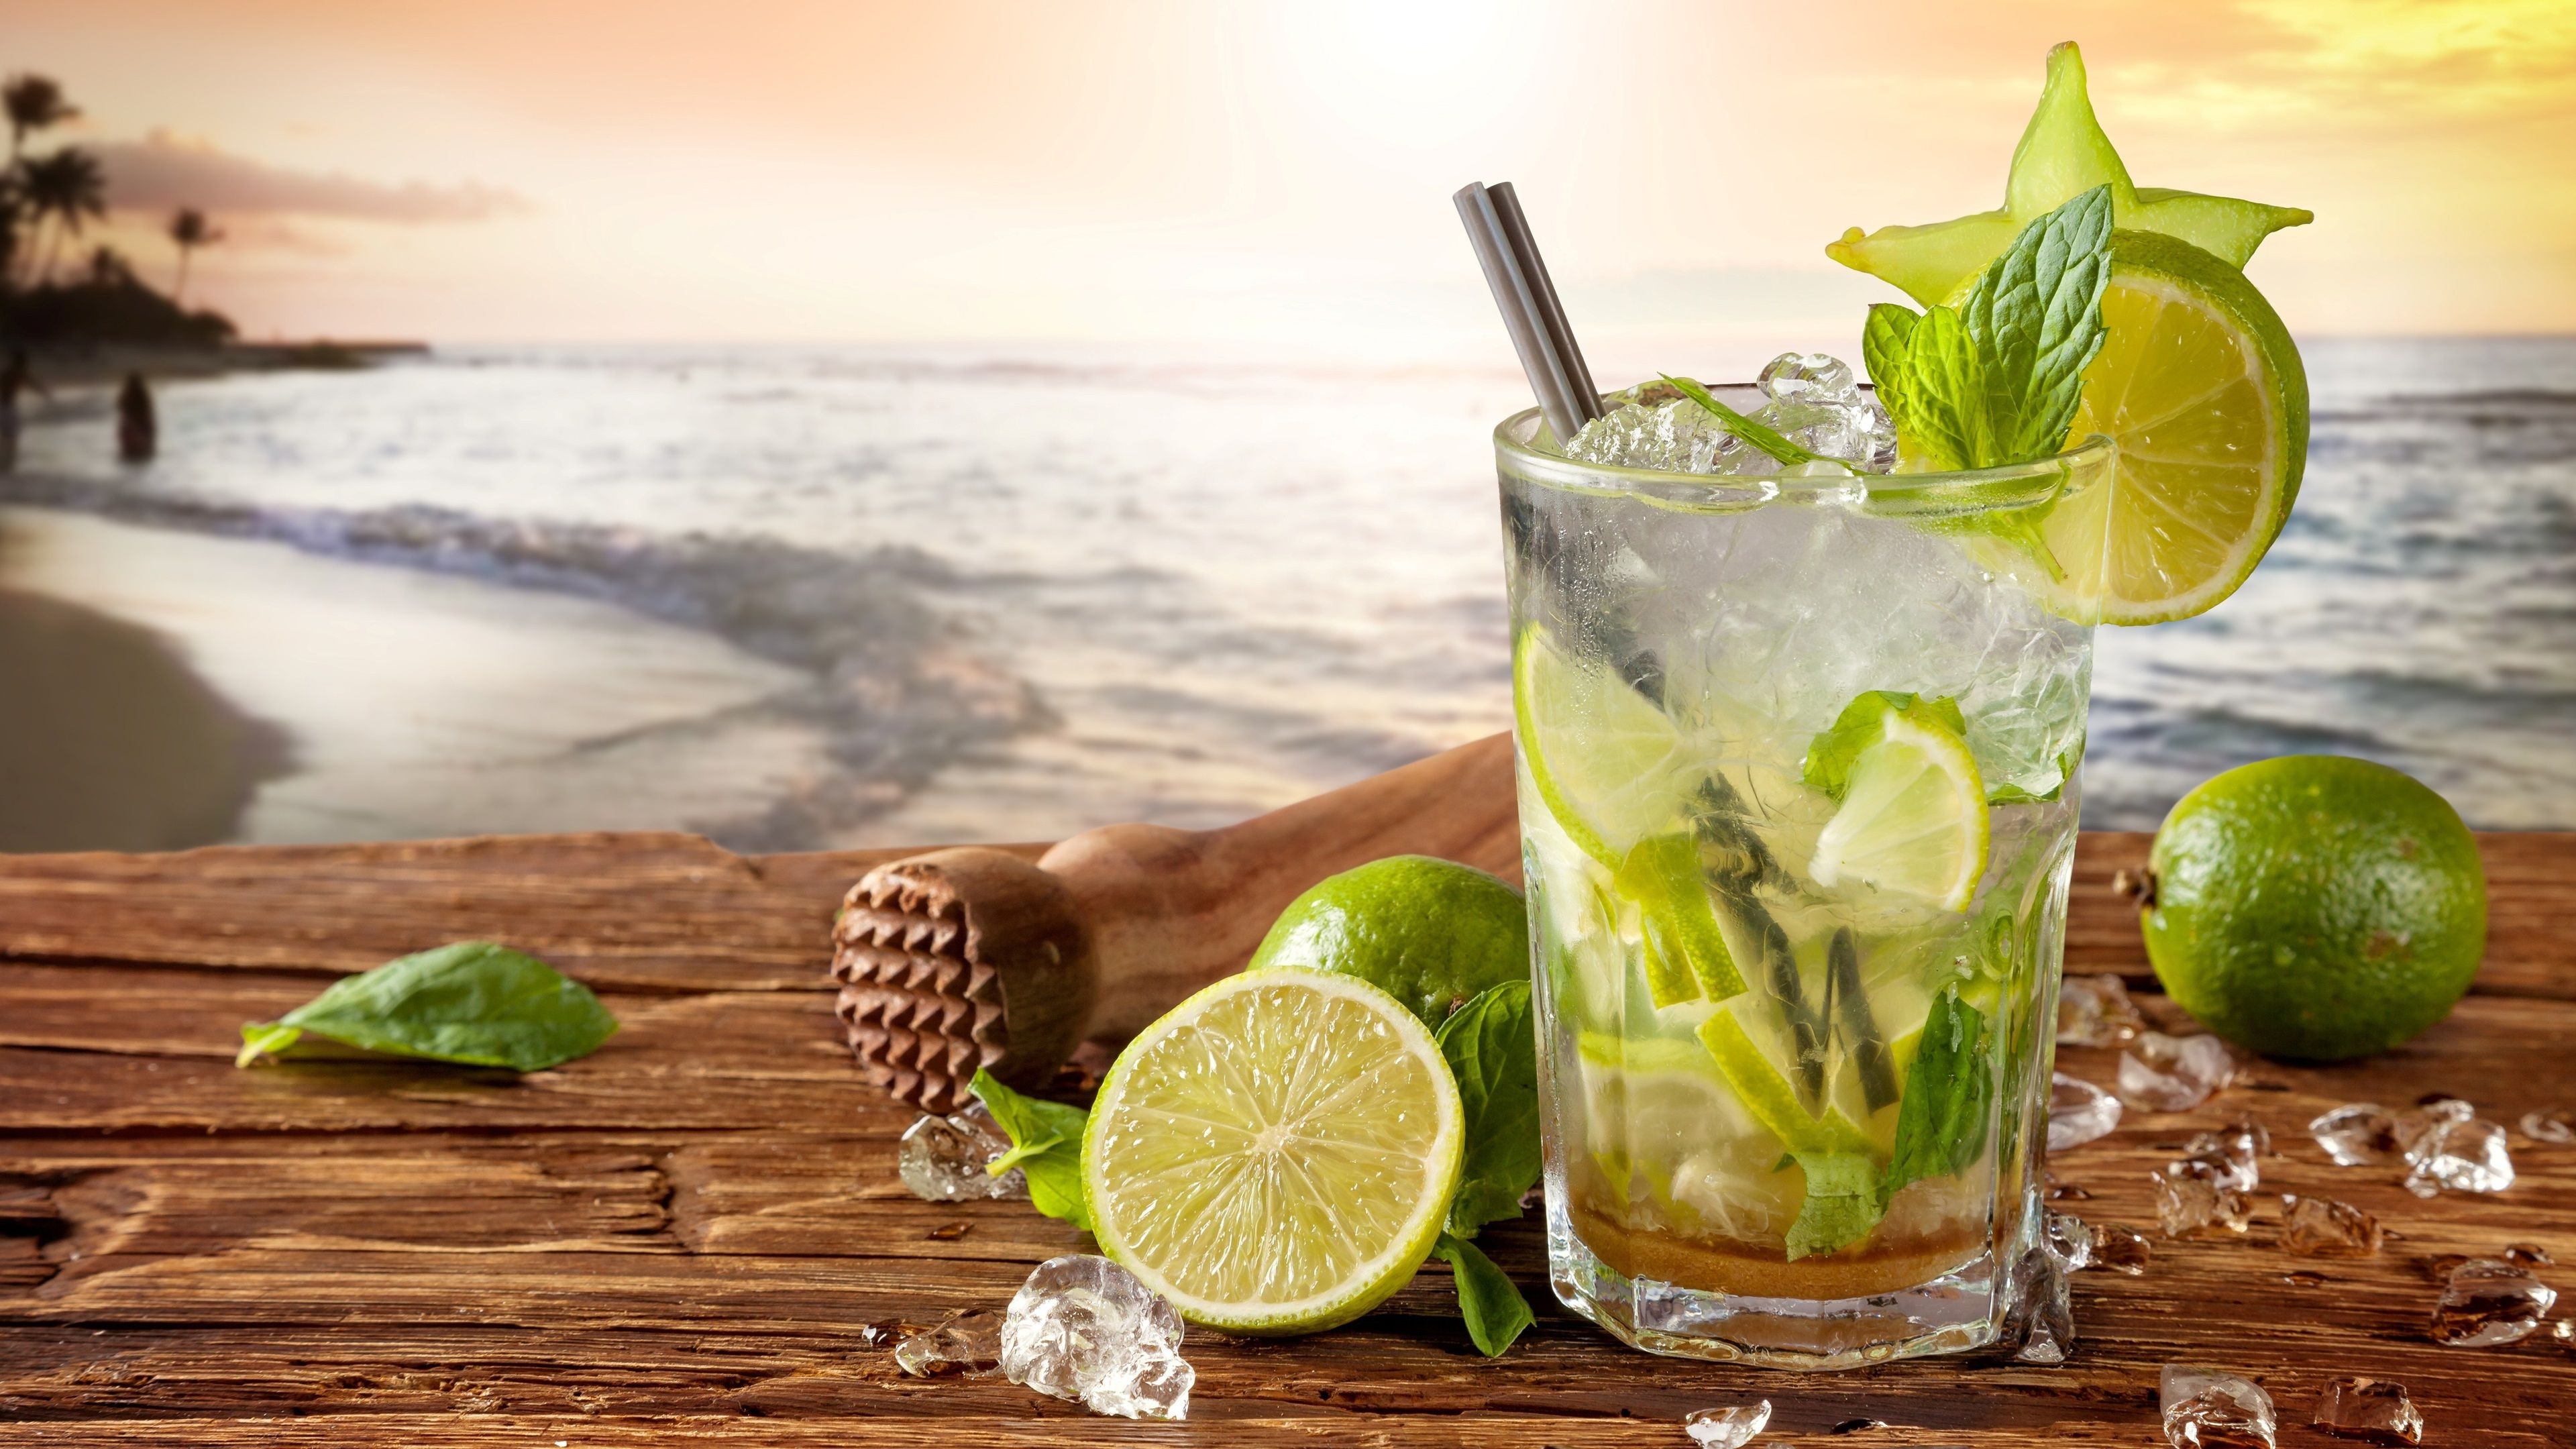 Lemonade: Mojito, A sweetened lime and mint-flavored Juice. 3840x2160 4K Background.